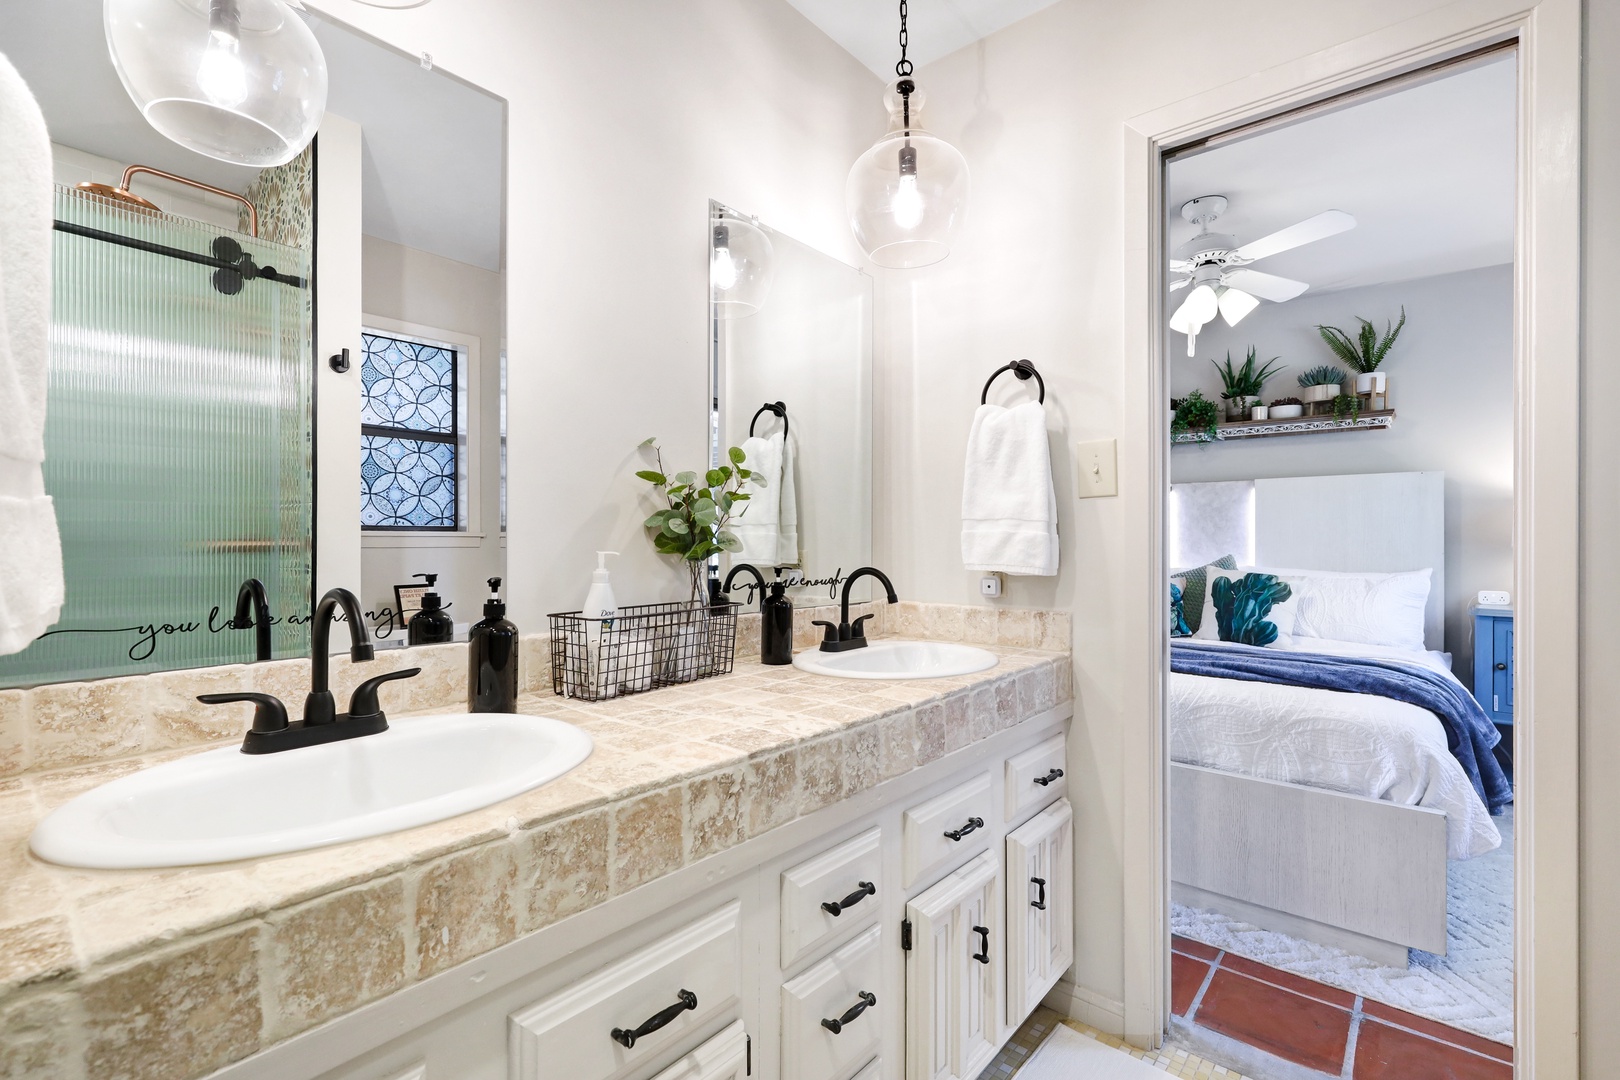 The second Jack & Jill ensuite offers dual vanities & a glass shower